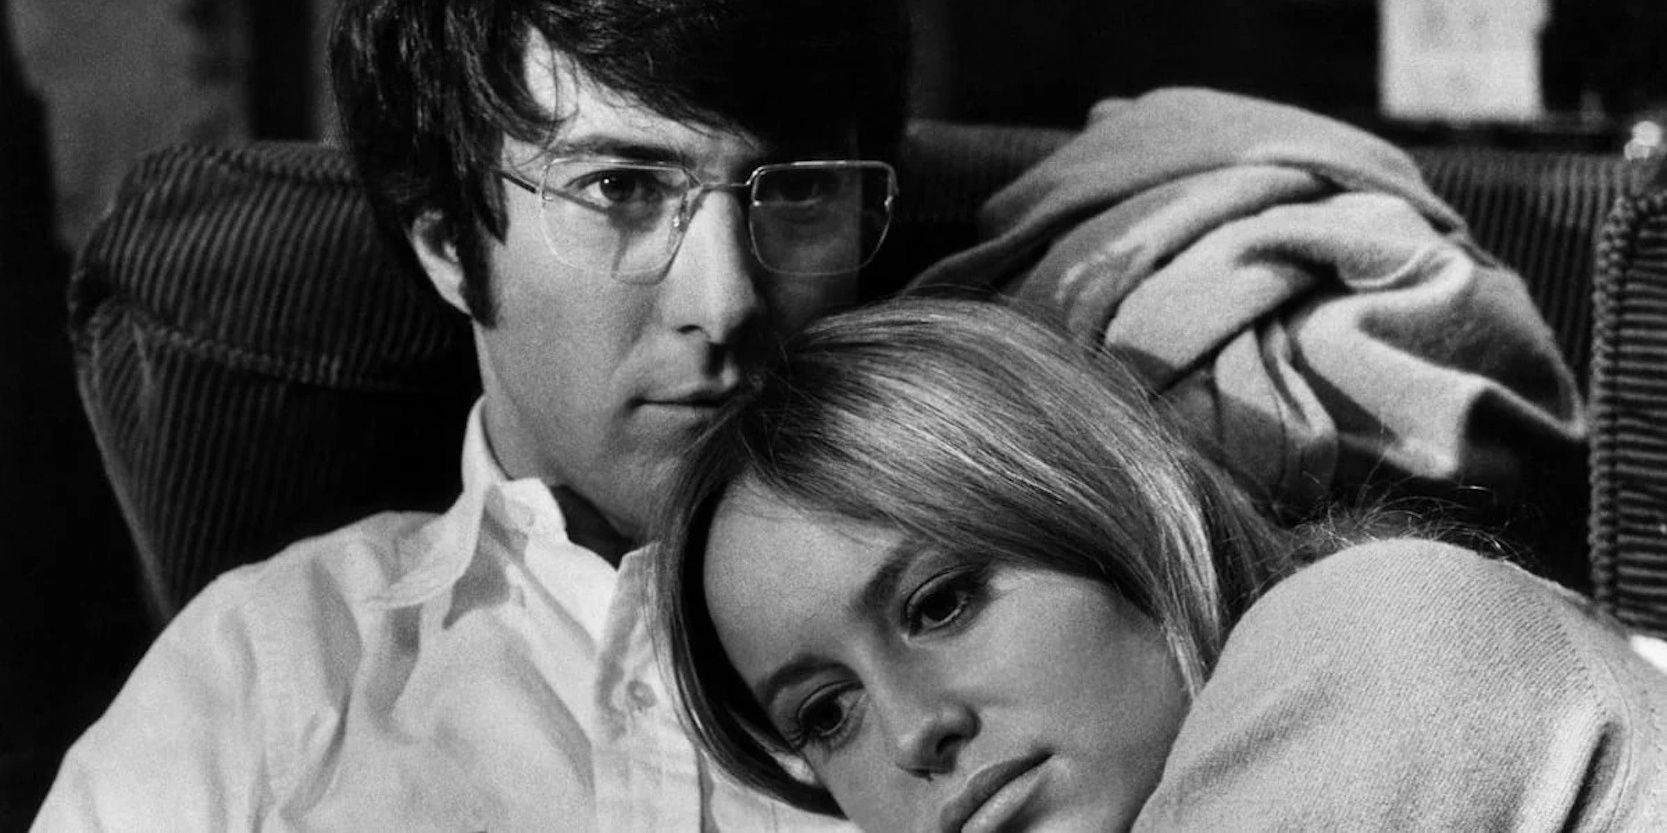 Dustin Hoffman laying with Susan George in Straw Dogs